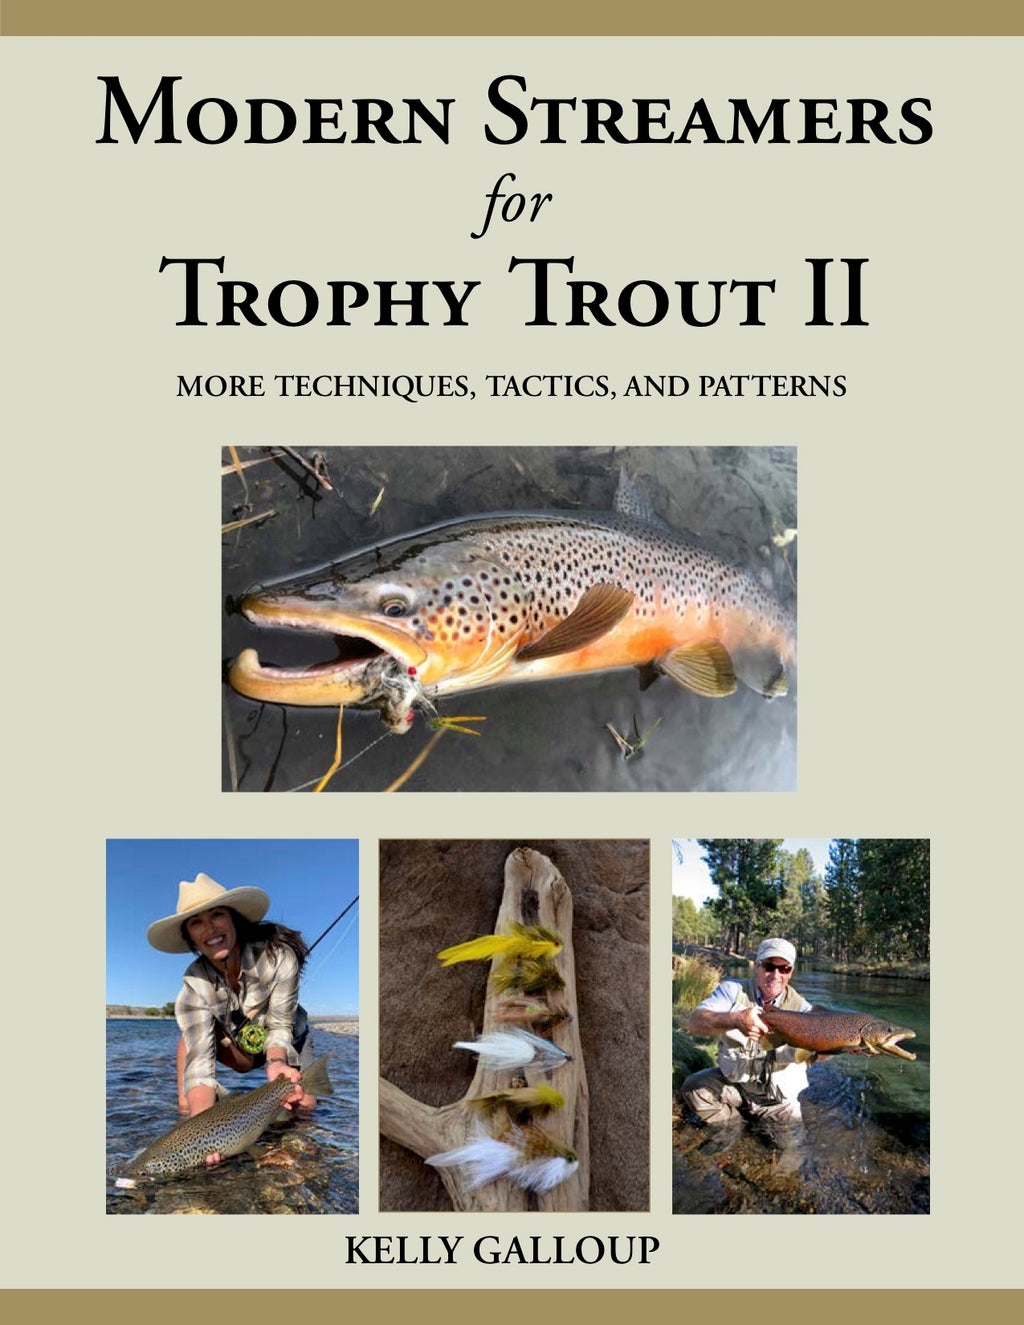 Modern Streamers for Trophy Trout II by Kelly Galloup